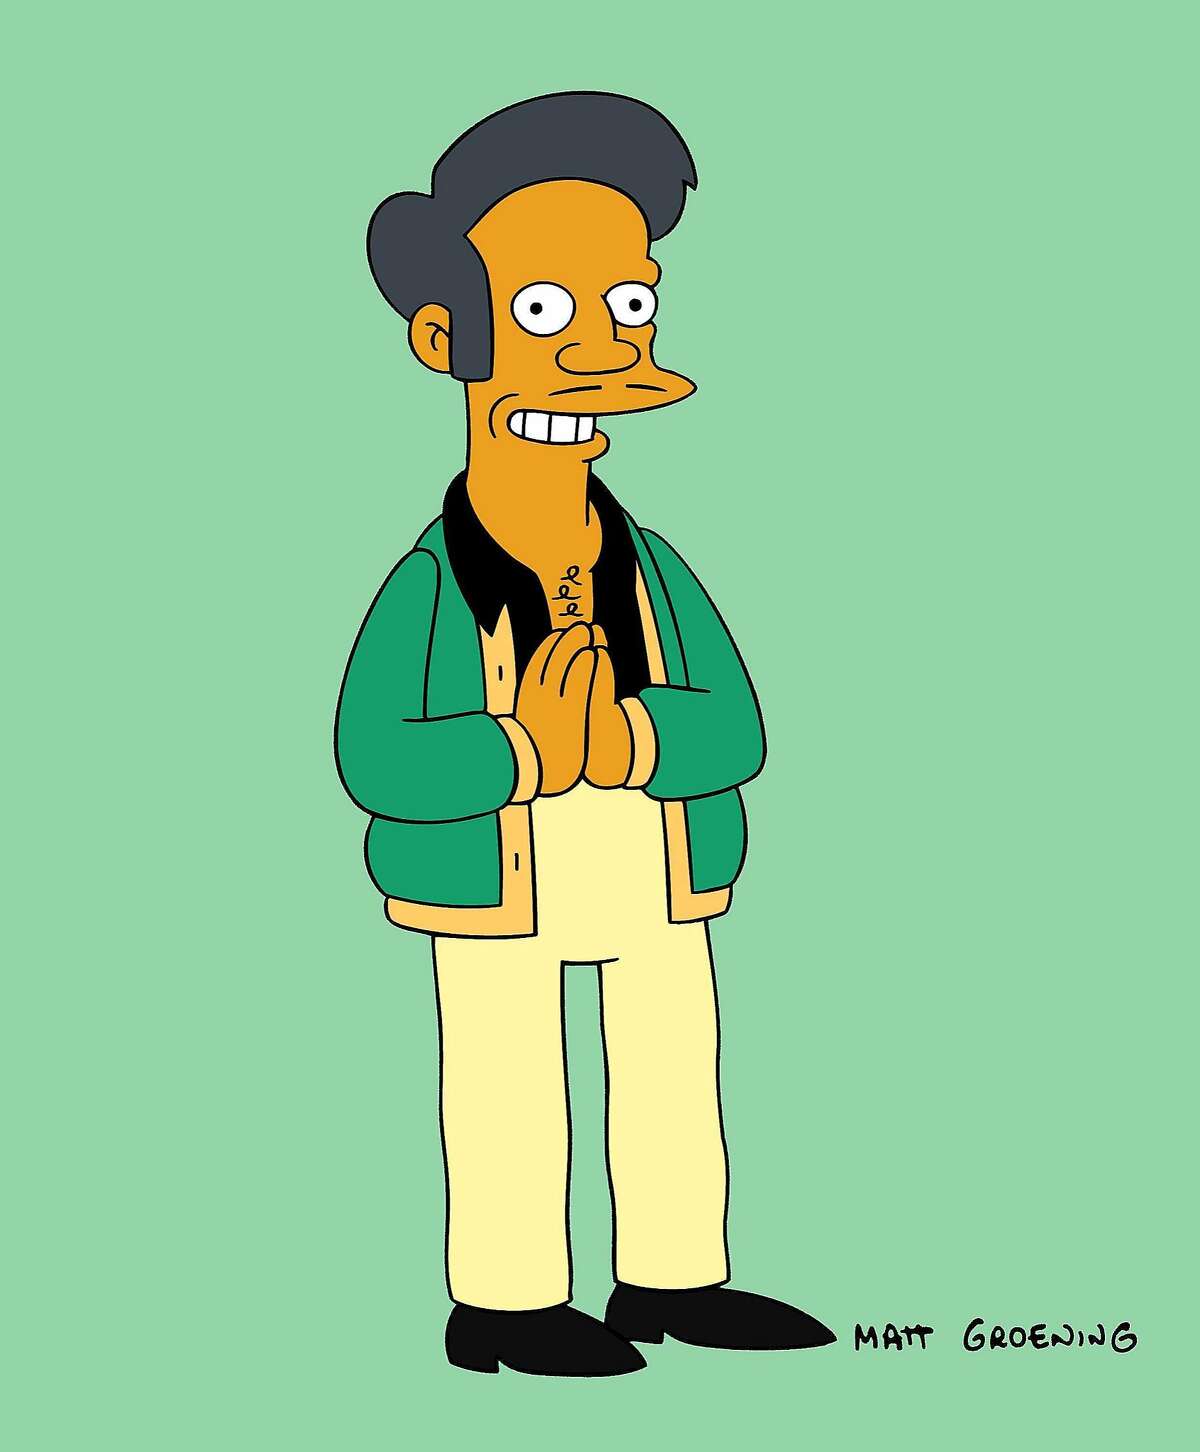 #39 Simpsons #39 reference to Apu criticism sparks backlash